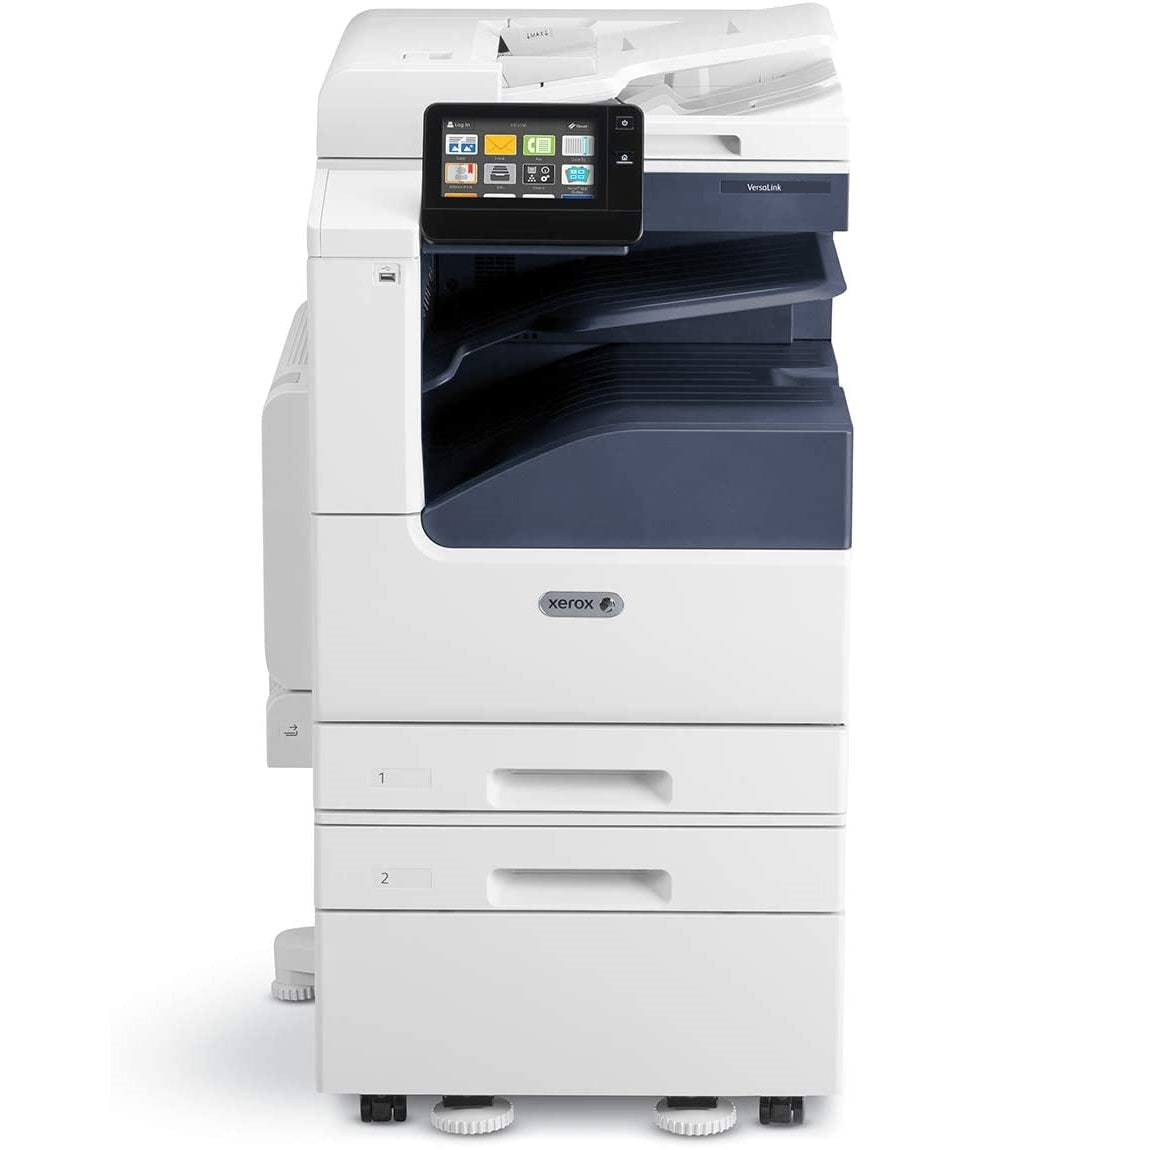 $55/mth. Xerox Repossessed versaLink C7020 Multifunction Color Printer Copier 11x17, A3, Letter, Legal